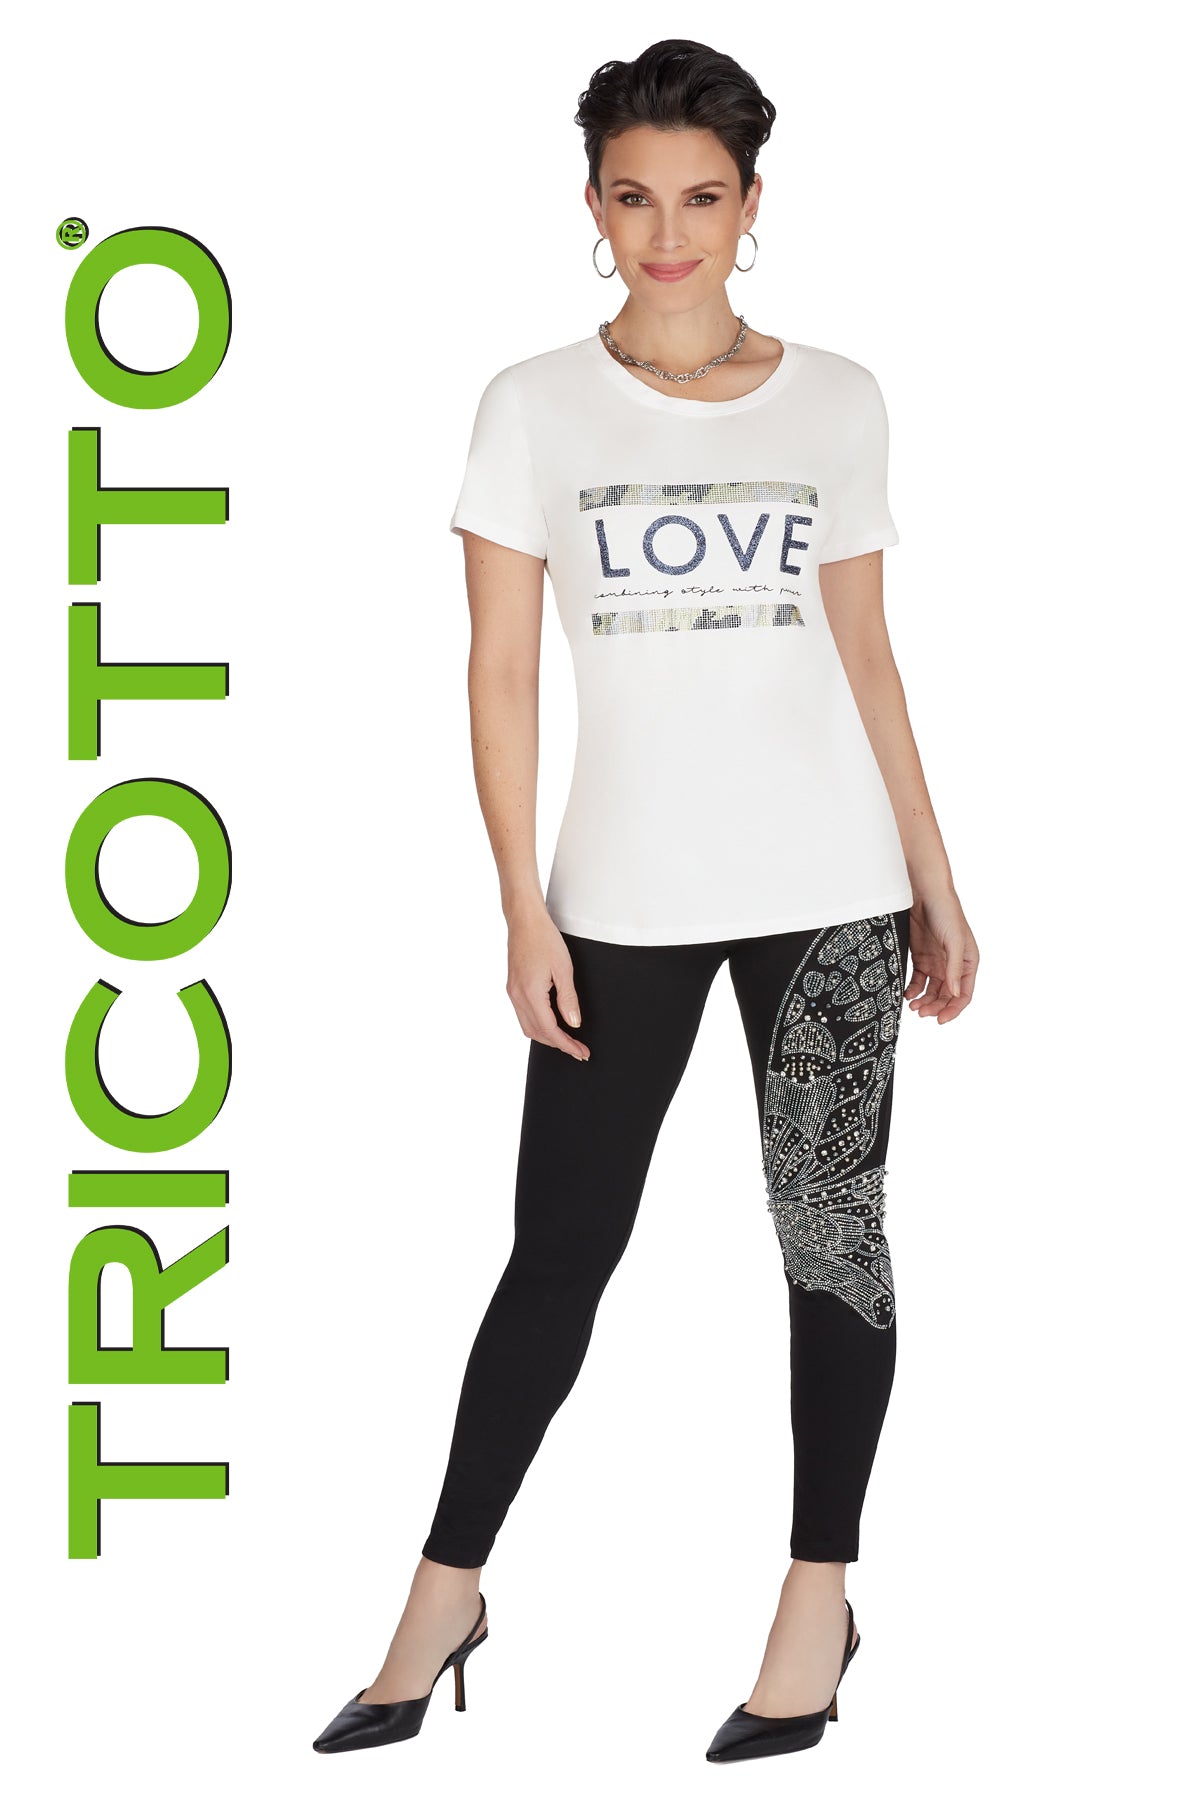 Tricotto Love T-shirt-Buy Tricotto T-shirts Online-Tricotto Clothing Montreal-Women's T-shirts-Tricotto Online Shop